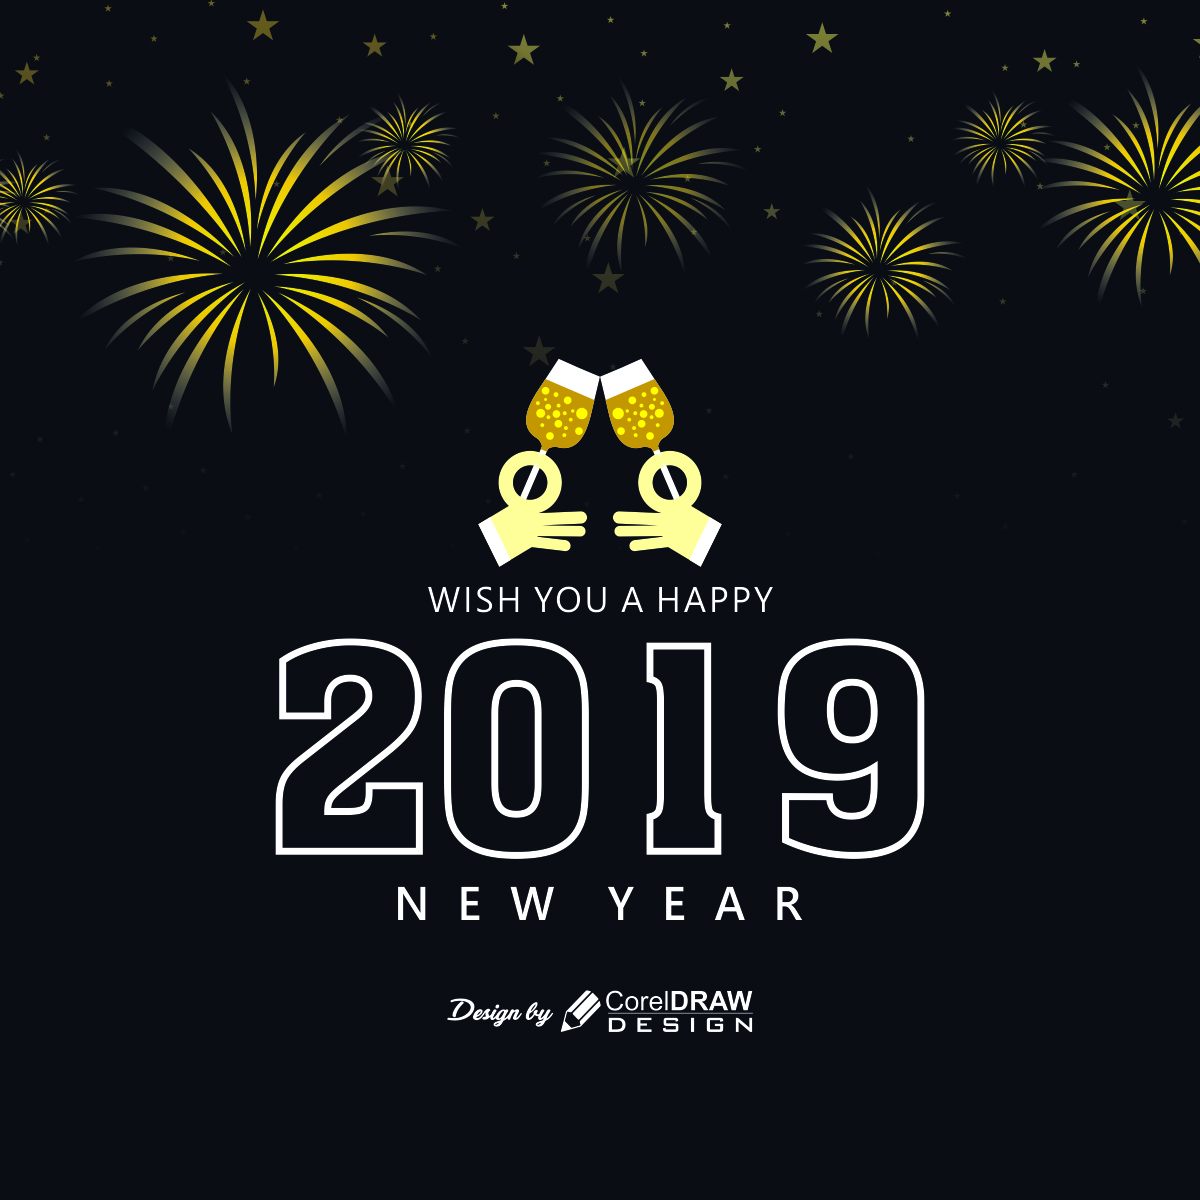 New Year 2019 Party Background